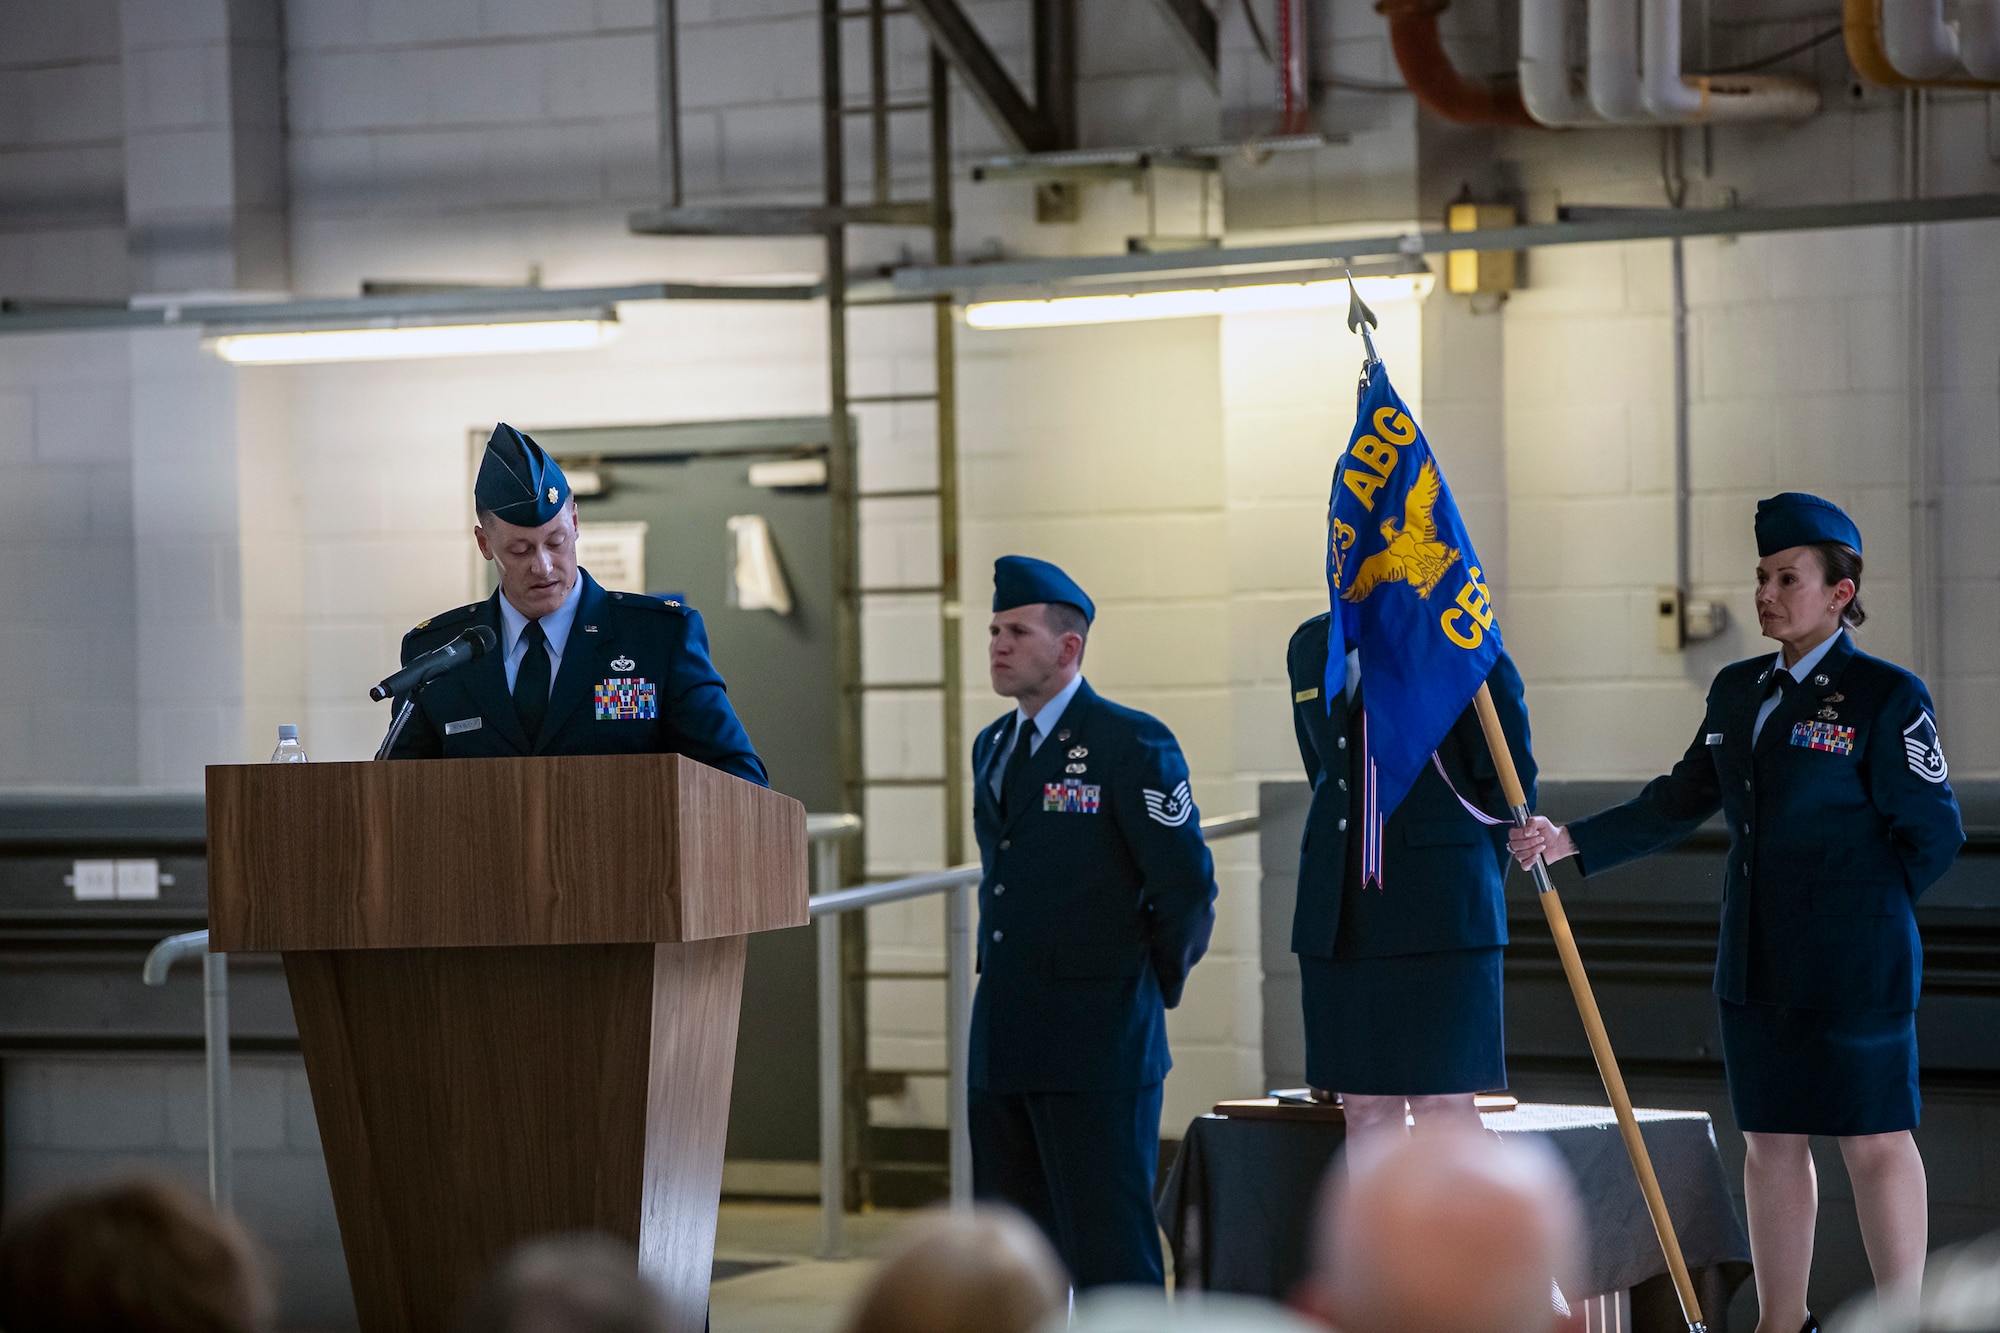 Lt. Col. Kevin Mckinley, left, 423d Civil Engineer Squadron incoming commander, speaks during a change of command ceremony at RAF Alconbury, England, June 22, 2022.  Prior to assuming command, Mckinley attended the Air Command and Staff College at Maxwell Air Force Base, Alabama. (U.S. Air Force photo by Staff Sgt. Eugene Oliver)